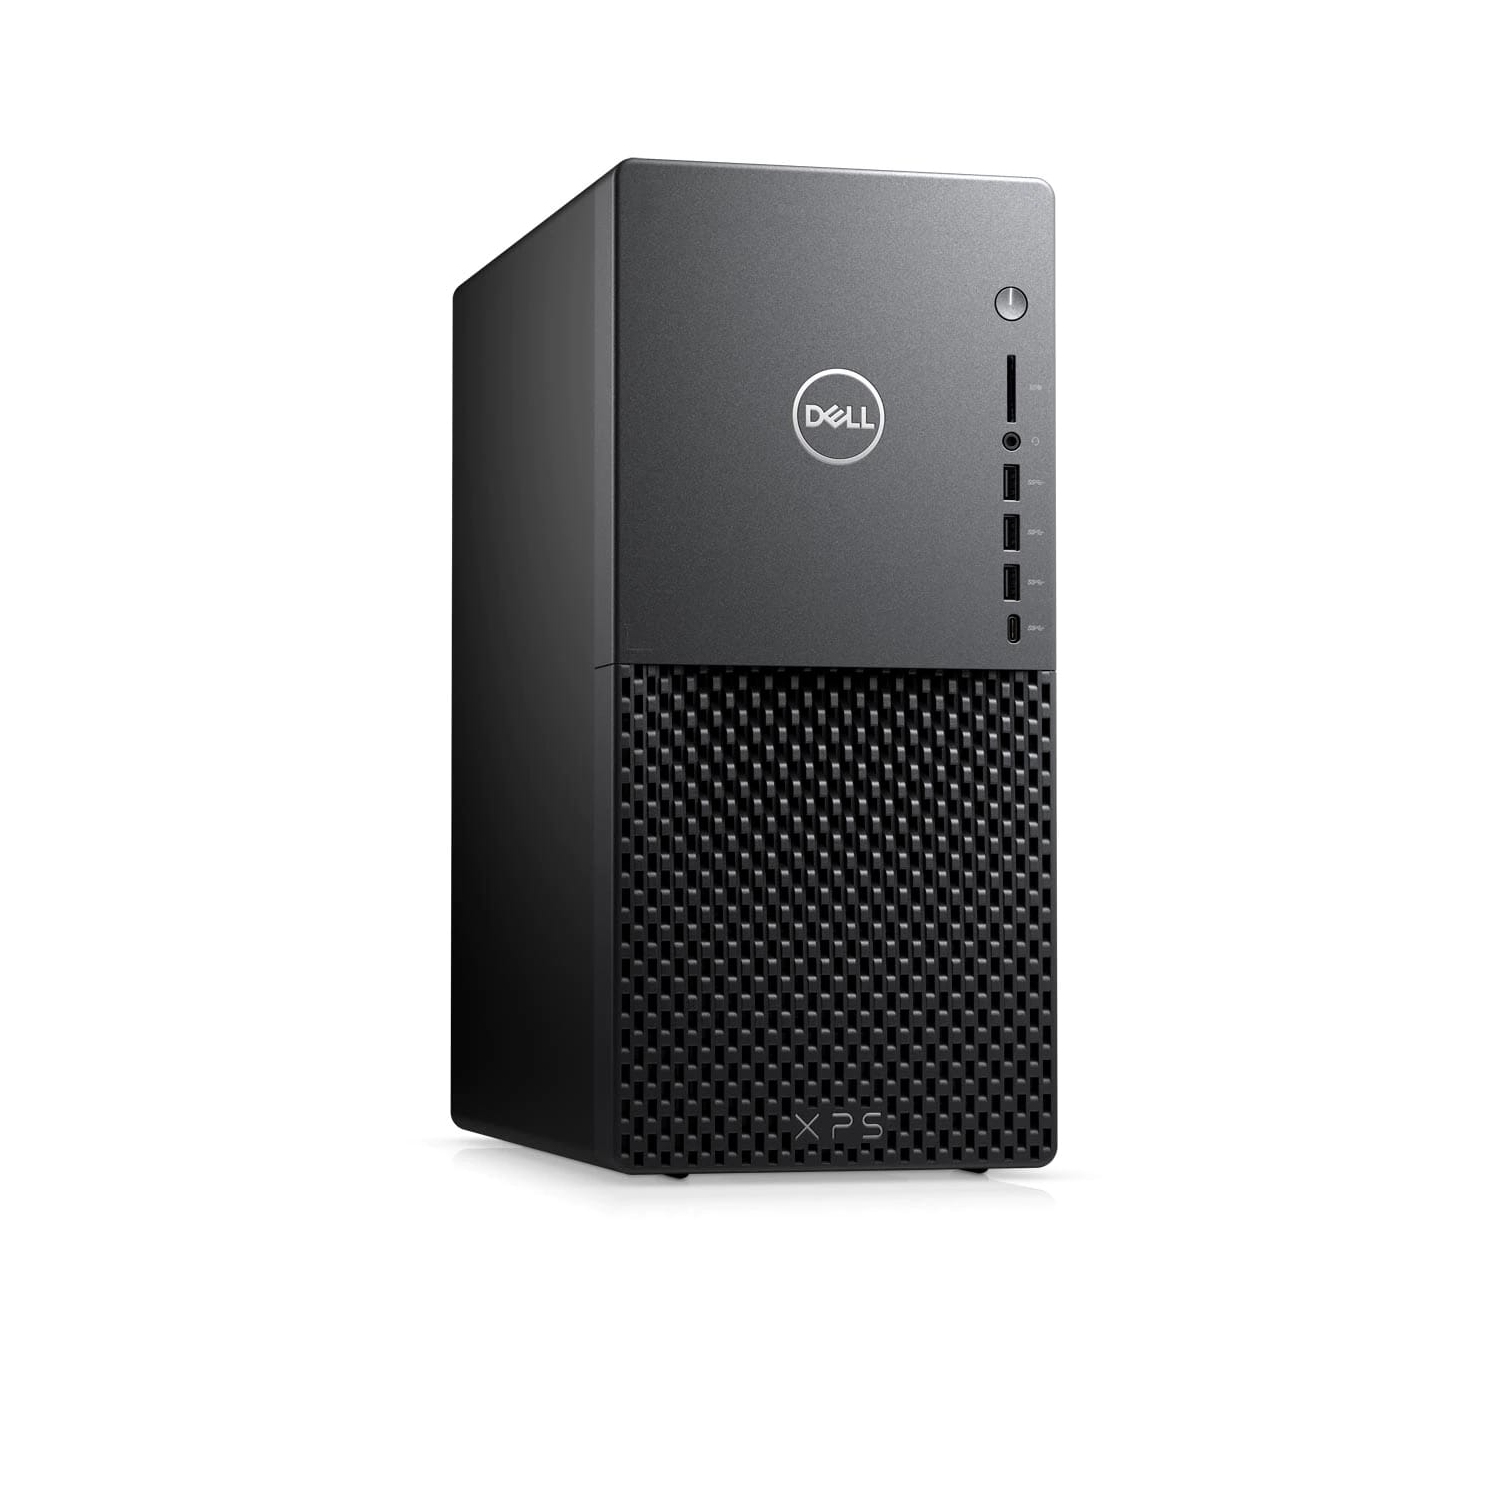 Refurbished (Excellent) - Dell XPS 8940 Desktop (2020) | Core i5 - 1TB HDD - 16GB RAM - RX 5700 | 6 Cores @ 4.4 GHz - 11th Gen CPU Certified Refurbished